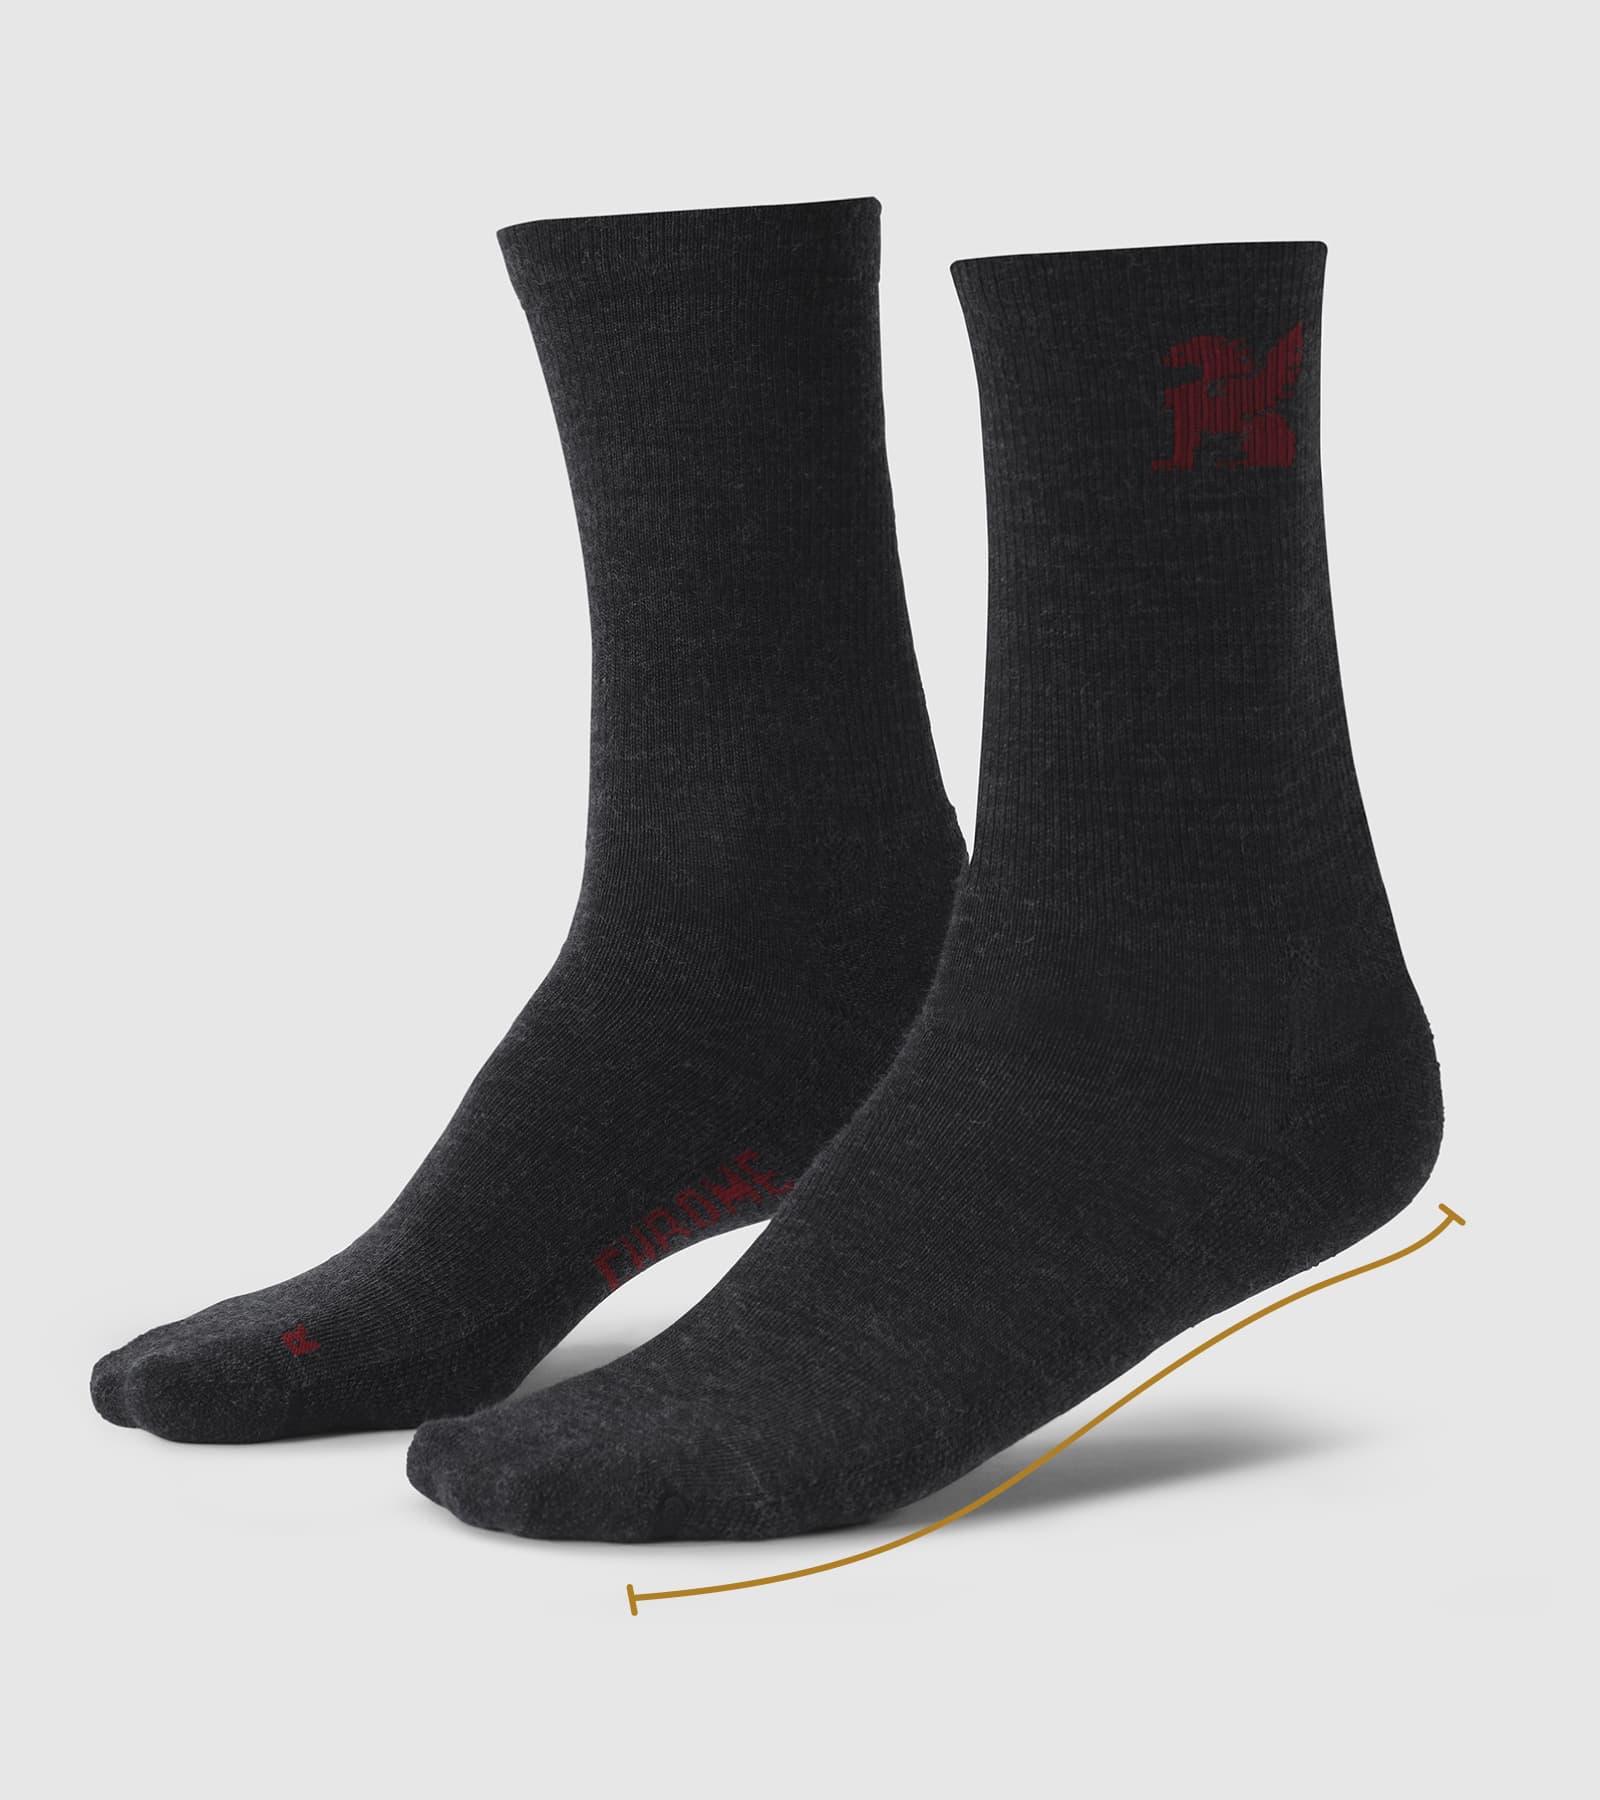 Chrome Industries Socks sizing guide image